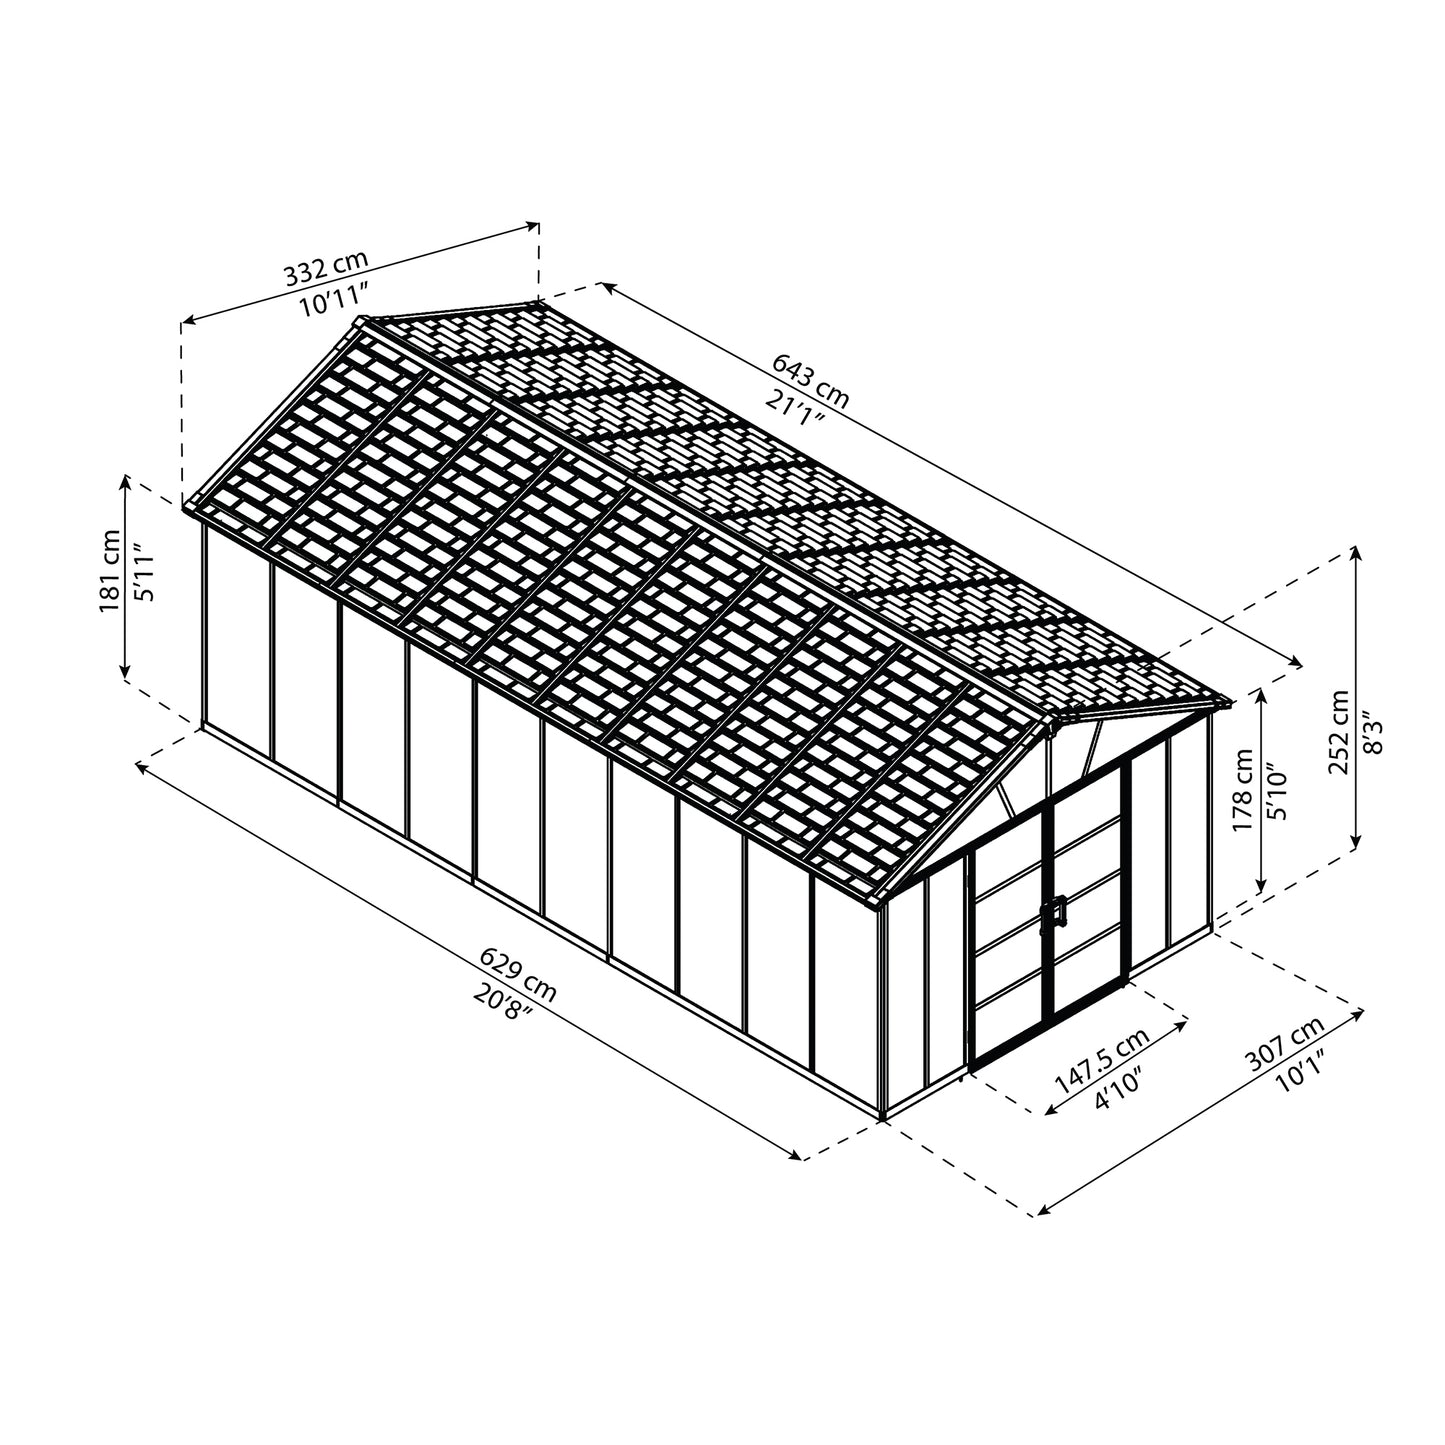 Canopia by Palram 11 x 21 Yukon Plastic Shed With Floor - Grey